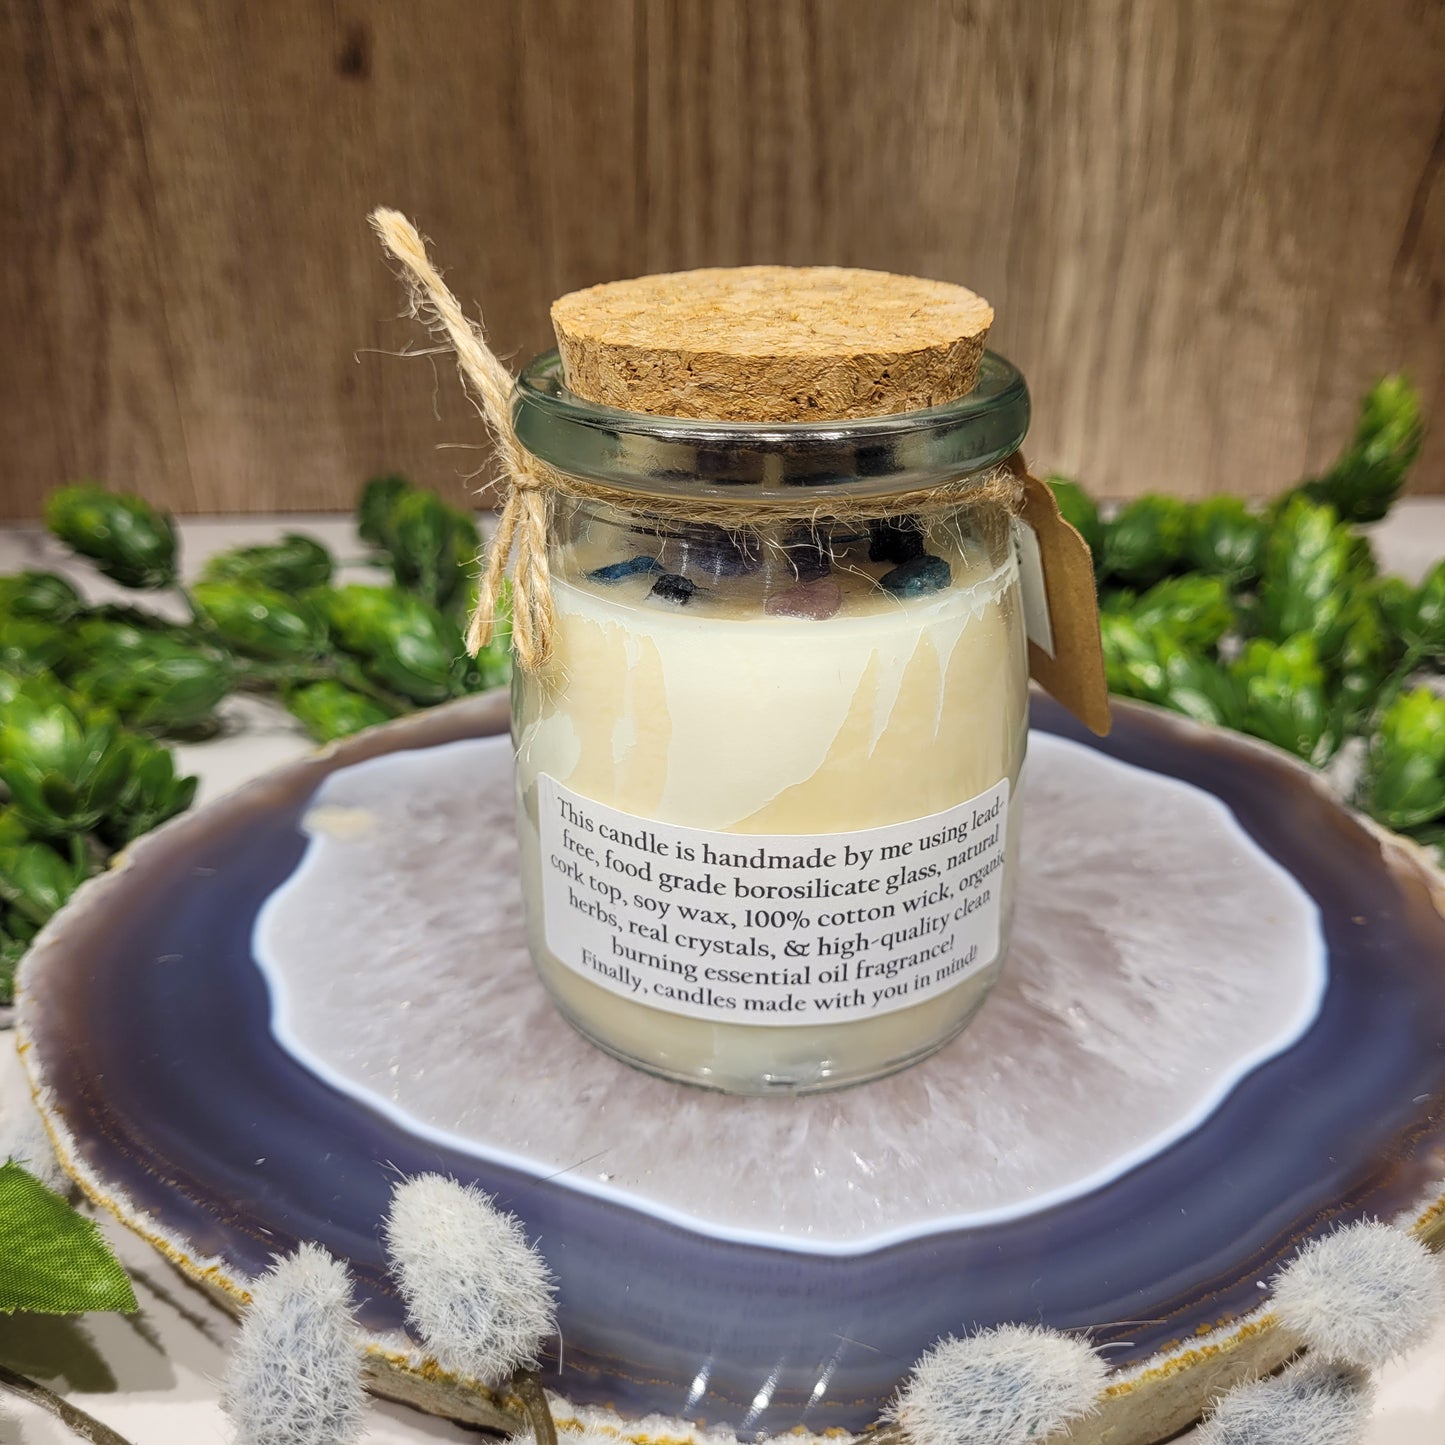 Blueberry Cobbler Candle